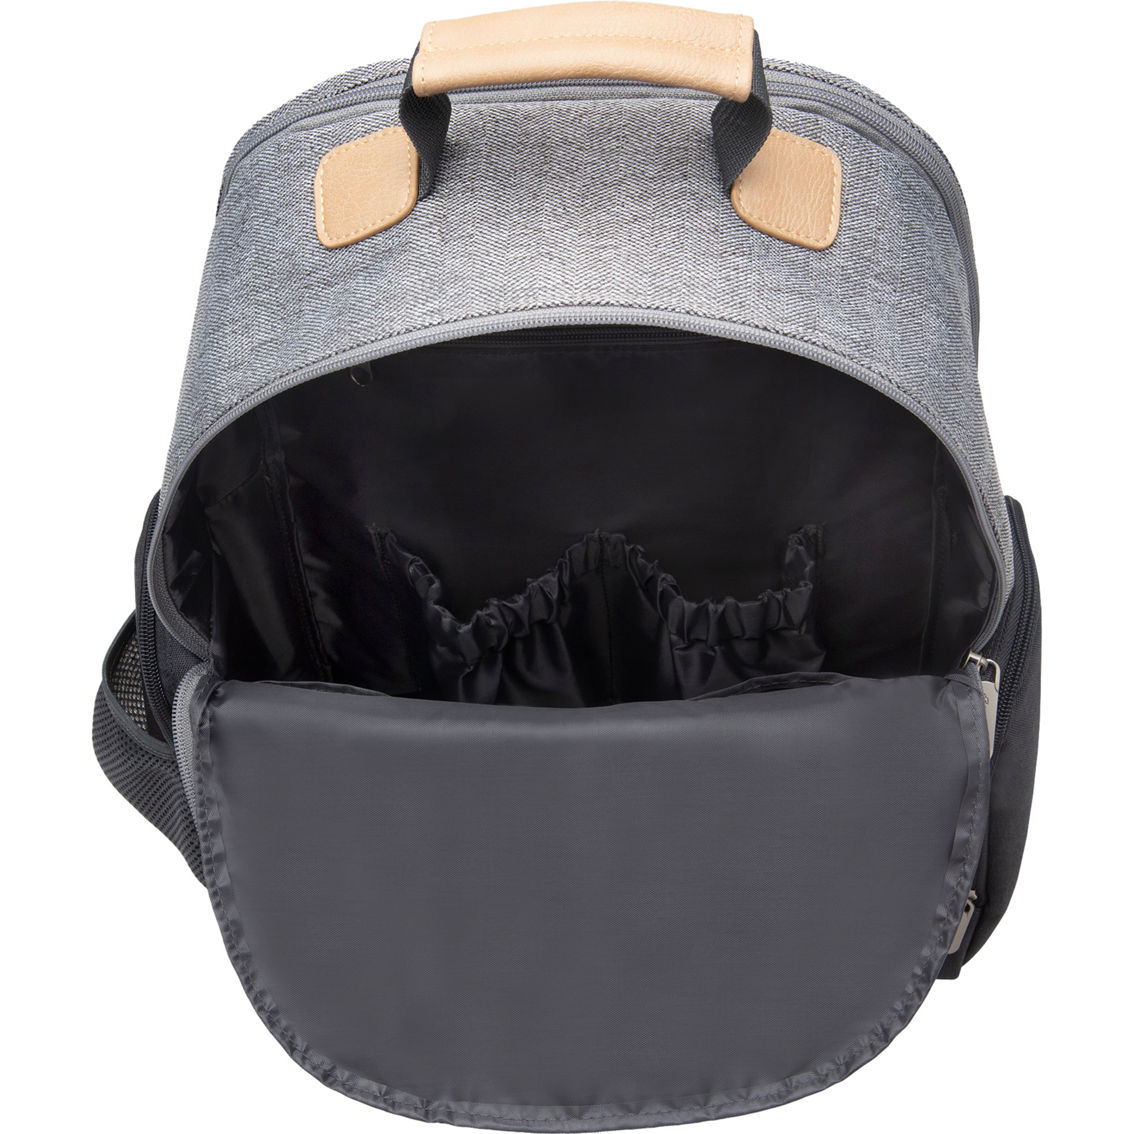 Eddie Bauer Places and Spaces Bridgeport Backpack Diaper Bag - Image 6 of 6